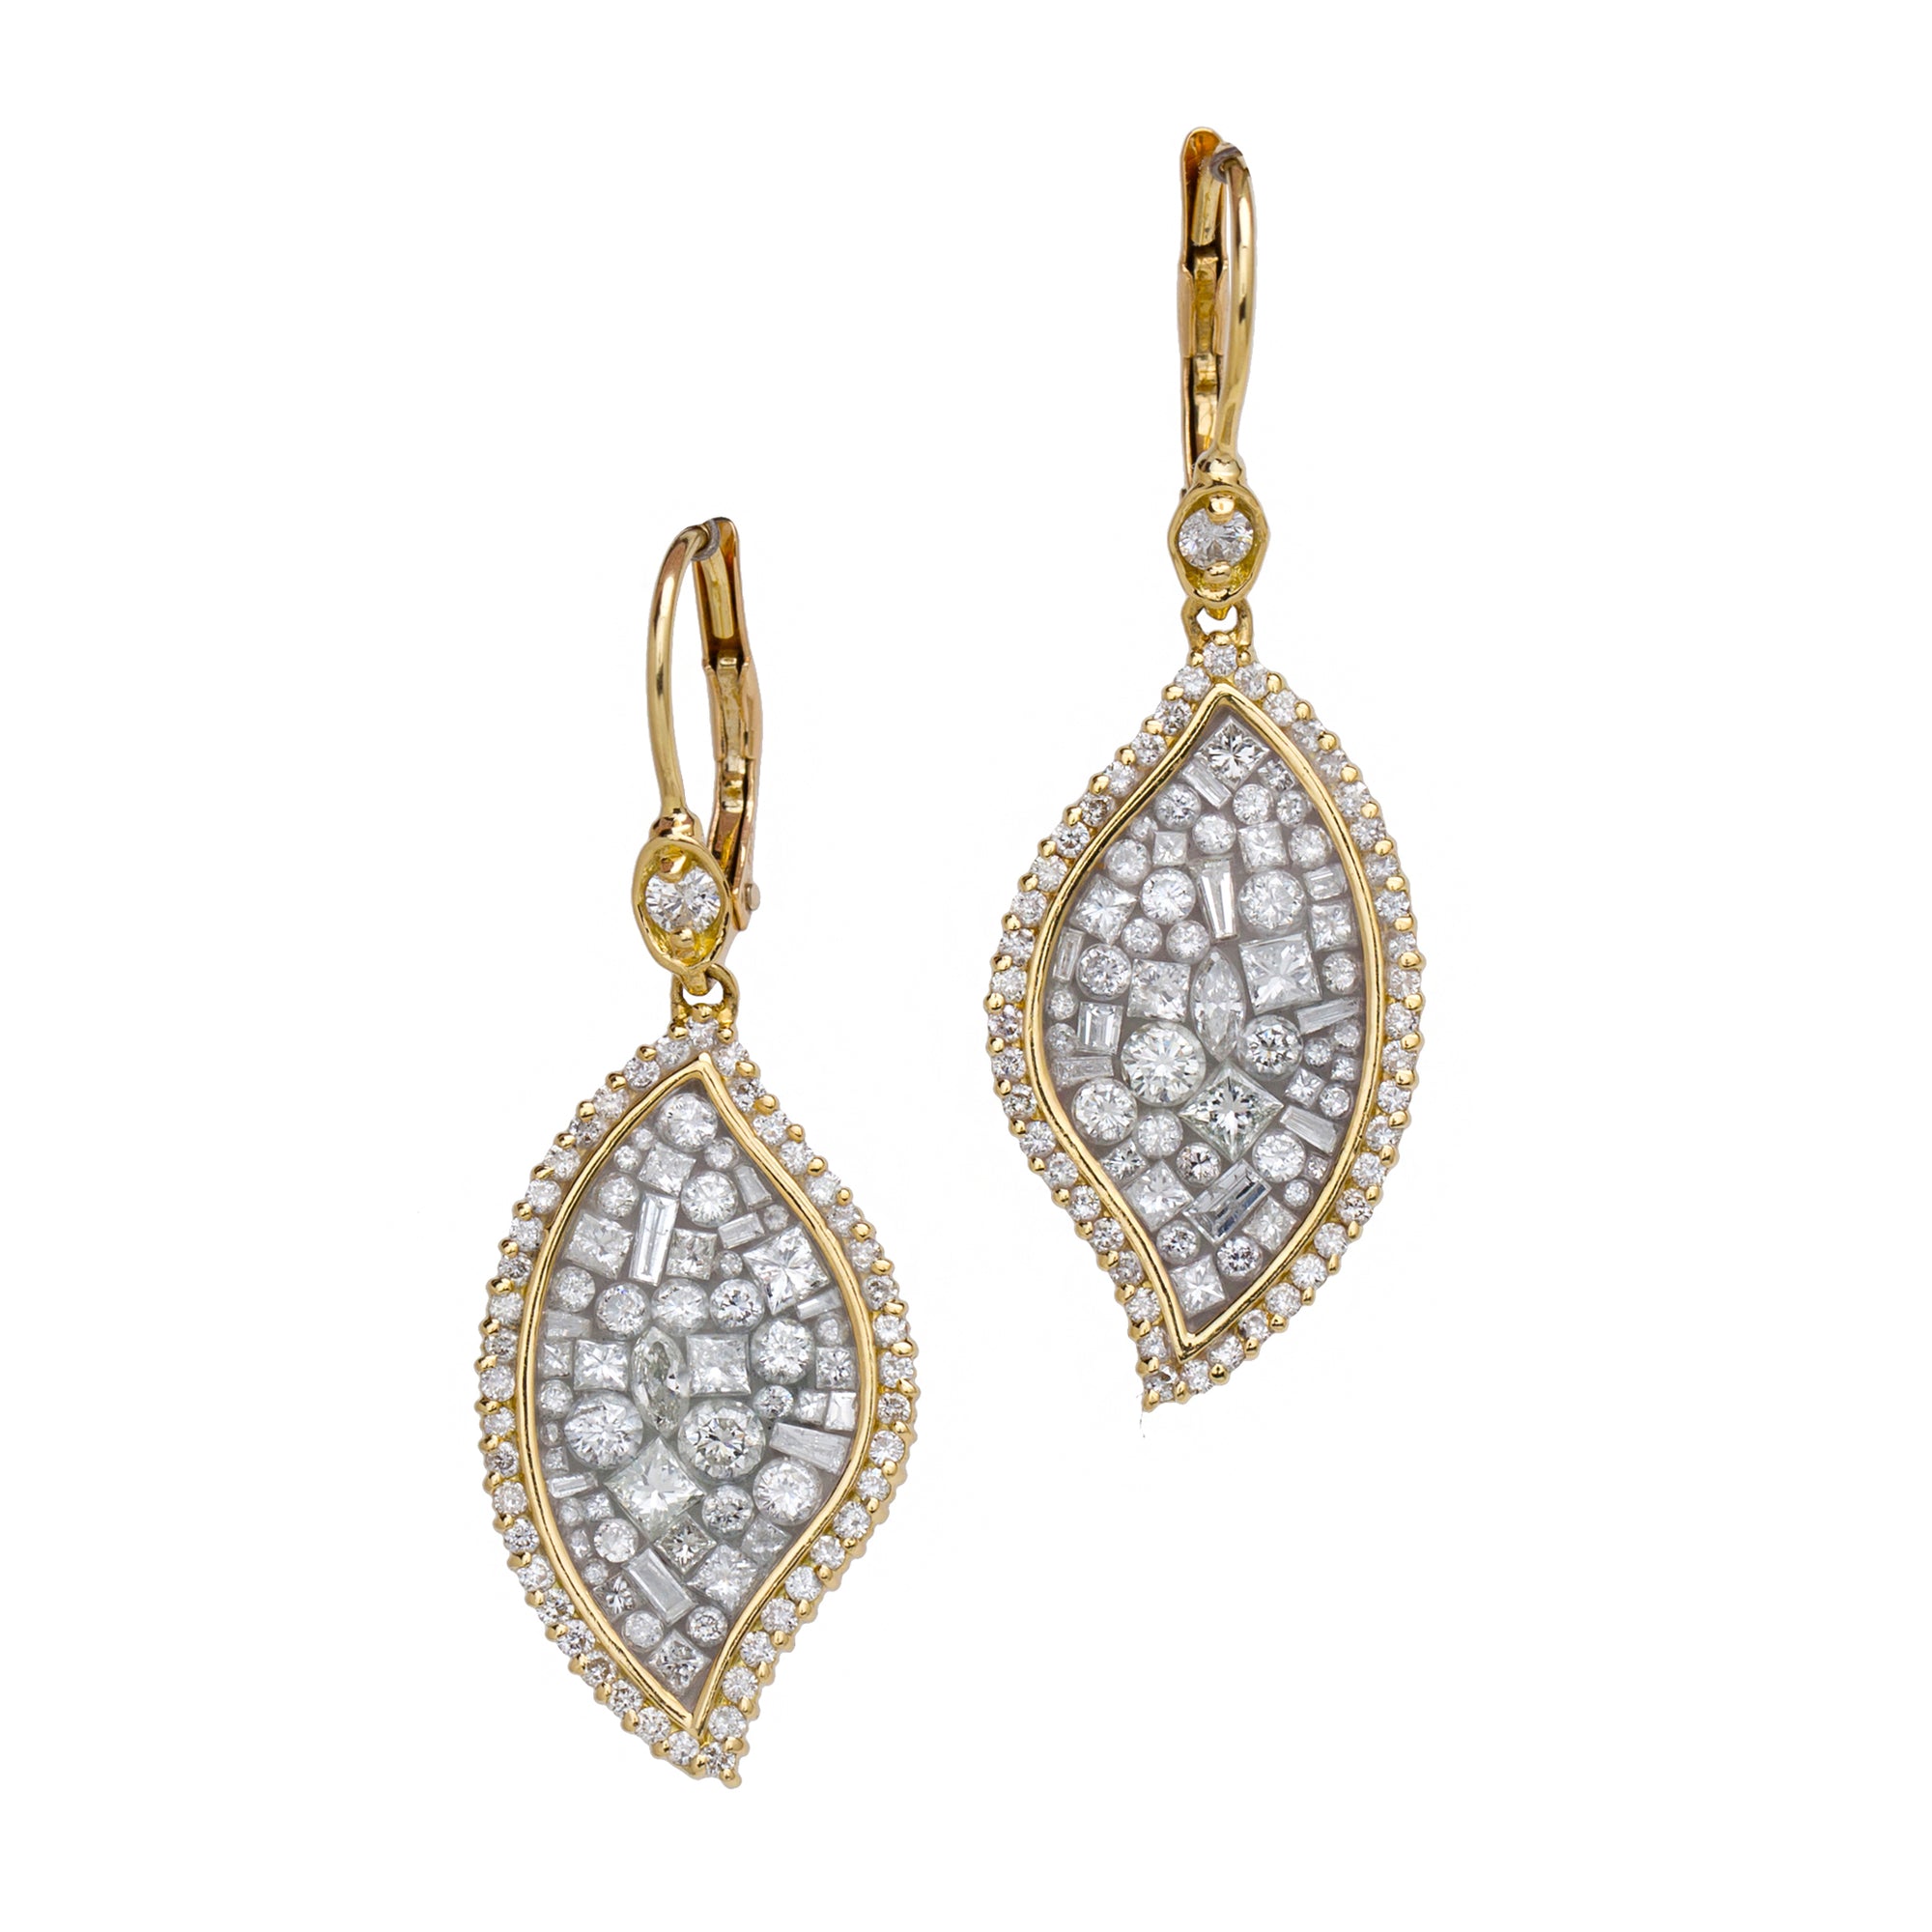 Ice Flame Diamond Earrings by Pleve available at Talisman Collection Fine Jewelers in El Dorado Hills, CA and online. Specs: 2.75 cttw diamonds, 18k yellow gold. 